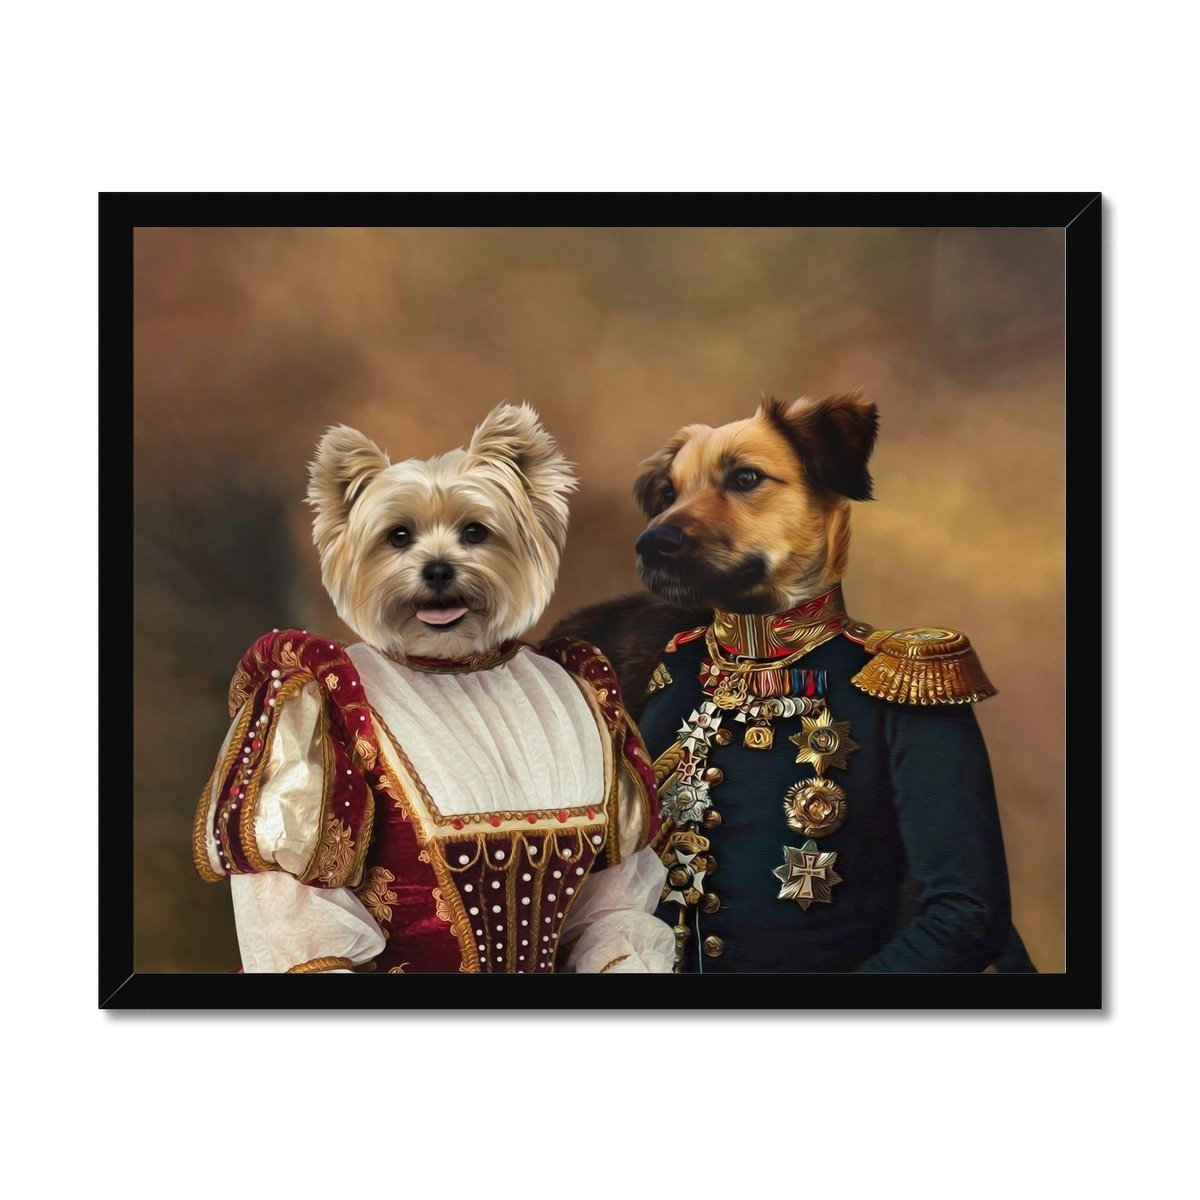 The Classy Pair: Custom Framed Pet Portrait - Paw & Glory, paw and glory, the admiral dog portrait, drawing dog portraits, pet photo clothing, aristocrat dog painting, dog portraits singapore, pet portraits leeds, pet portrait